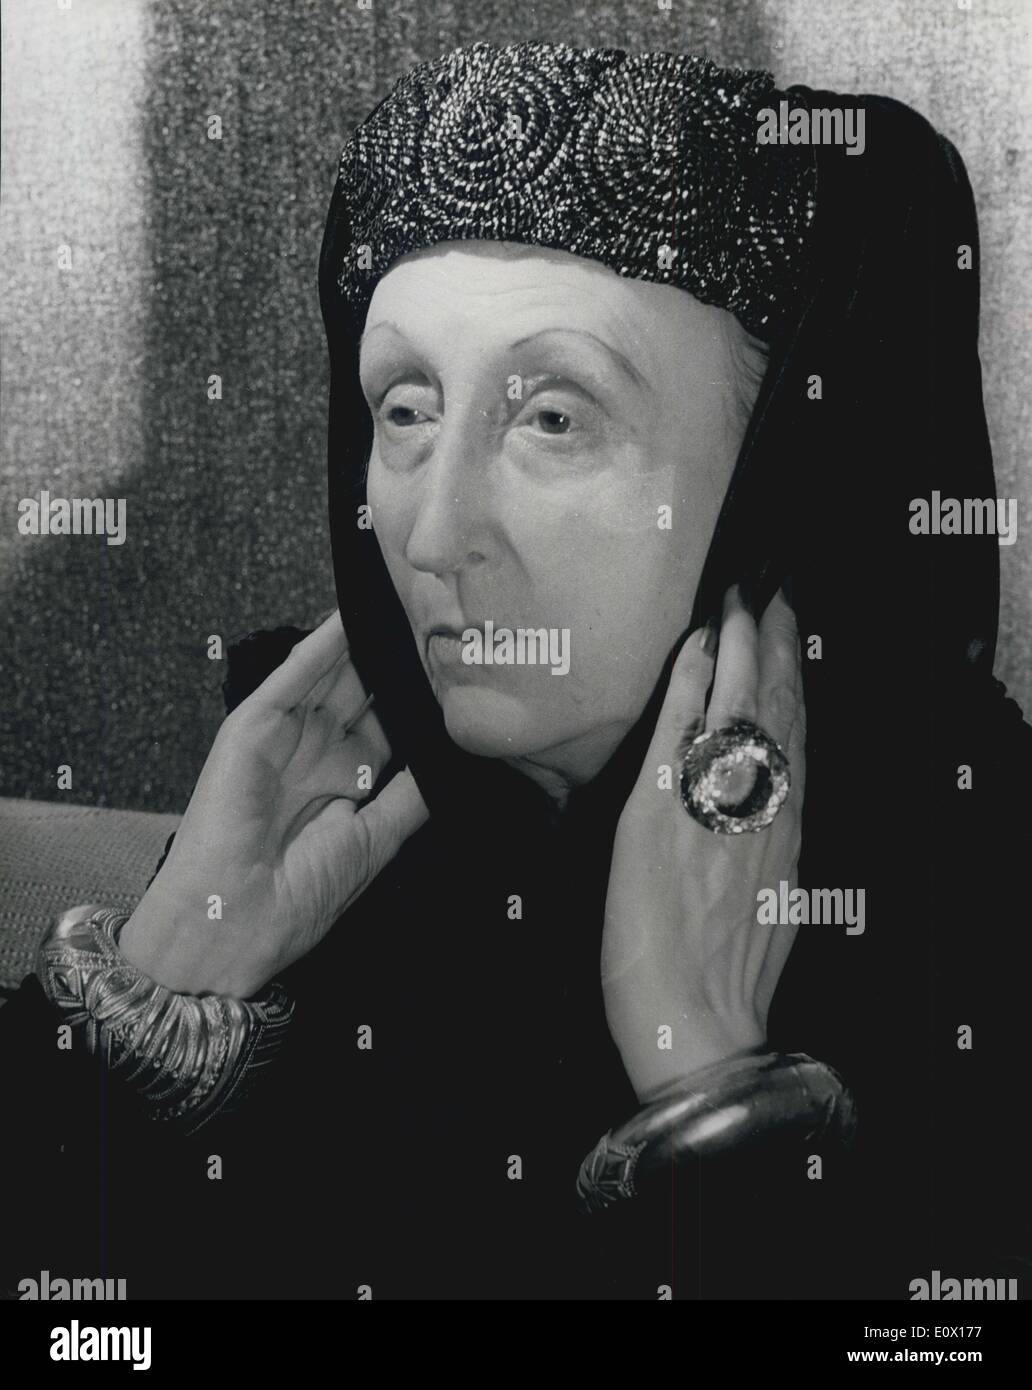 Dec. 10, 1964 - Dame Edith Sitwell Dies. Britain's Most Distinbuished spinster. Dame Edith Sitwel - Poet - noevlist -rebel and Britain's most distinguished spinster died last night at the age of 77. She had been taken to st. Thomas's Hospital after a heart attack. She had only finished her autobiography in April of this year - and it is to be publkshed in the new Year under the title ''Taken care Of''. Photo shows Dame Edith Sitwell - picture taken November 1952. Stock Photo